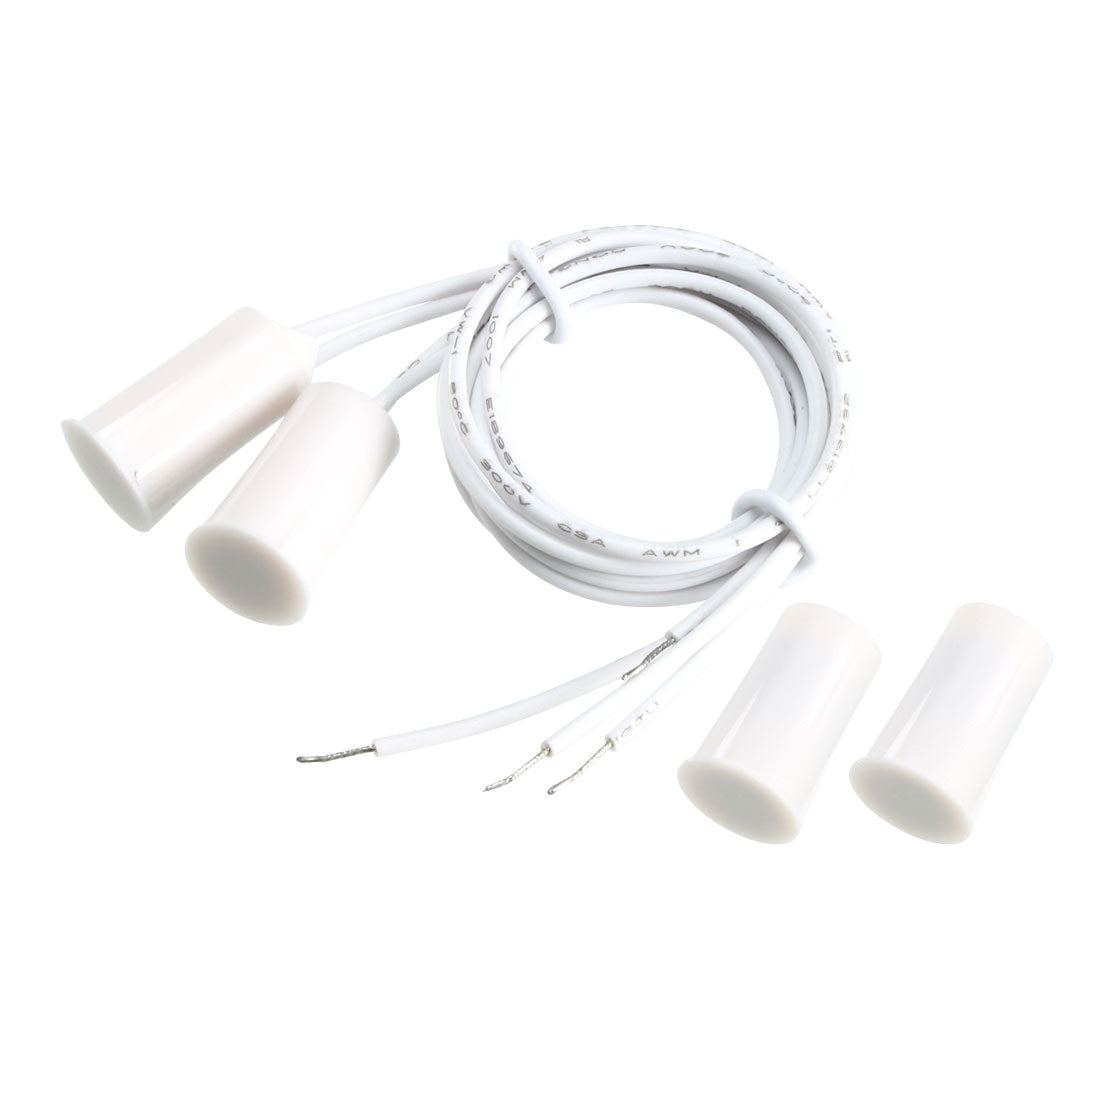 uxcell Uxcell 2pcs RC-33 NC Recessed Wired Security Window Door Contact Sensor Alarm Magnetic Reed Switch White